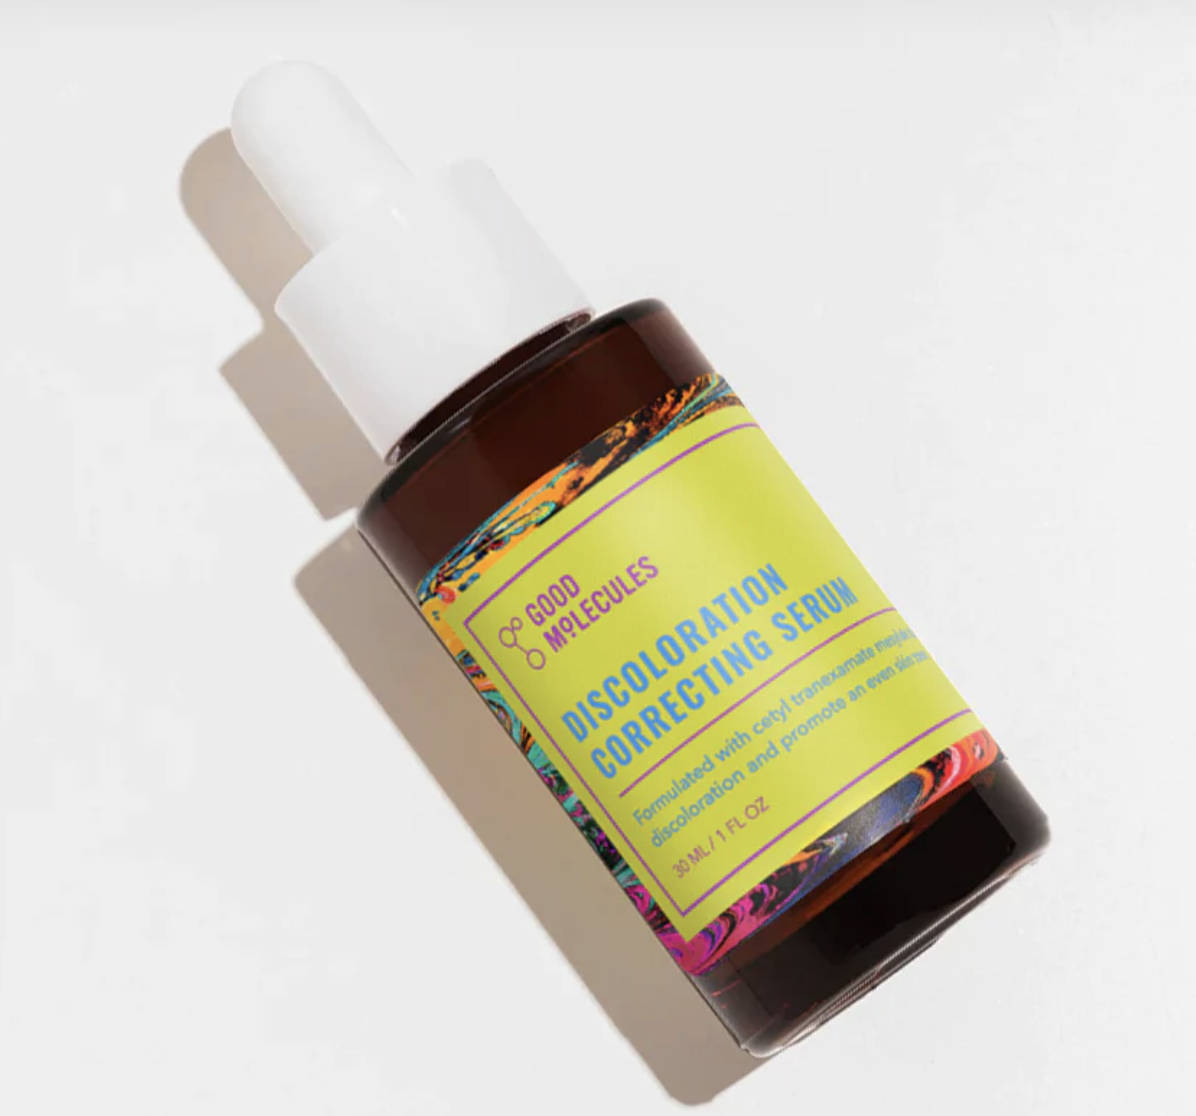 https://www.goodmolecules.com/products/discoloration-correcting-serum?variant=40398185693284